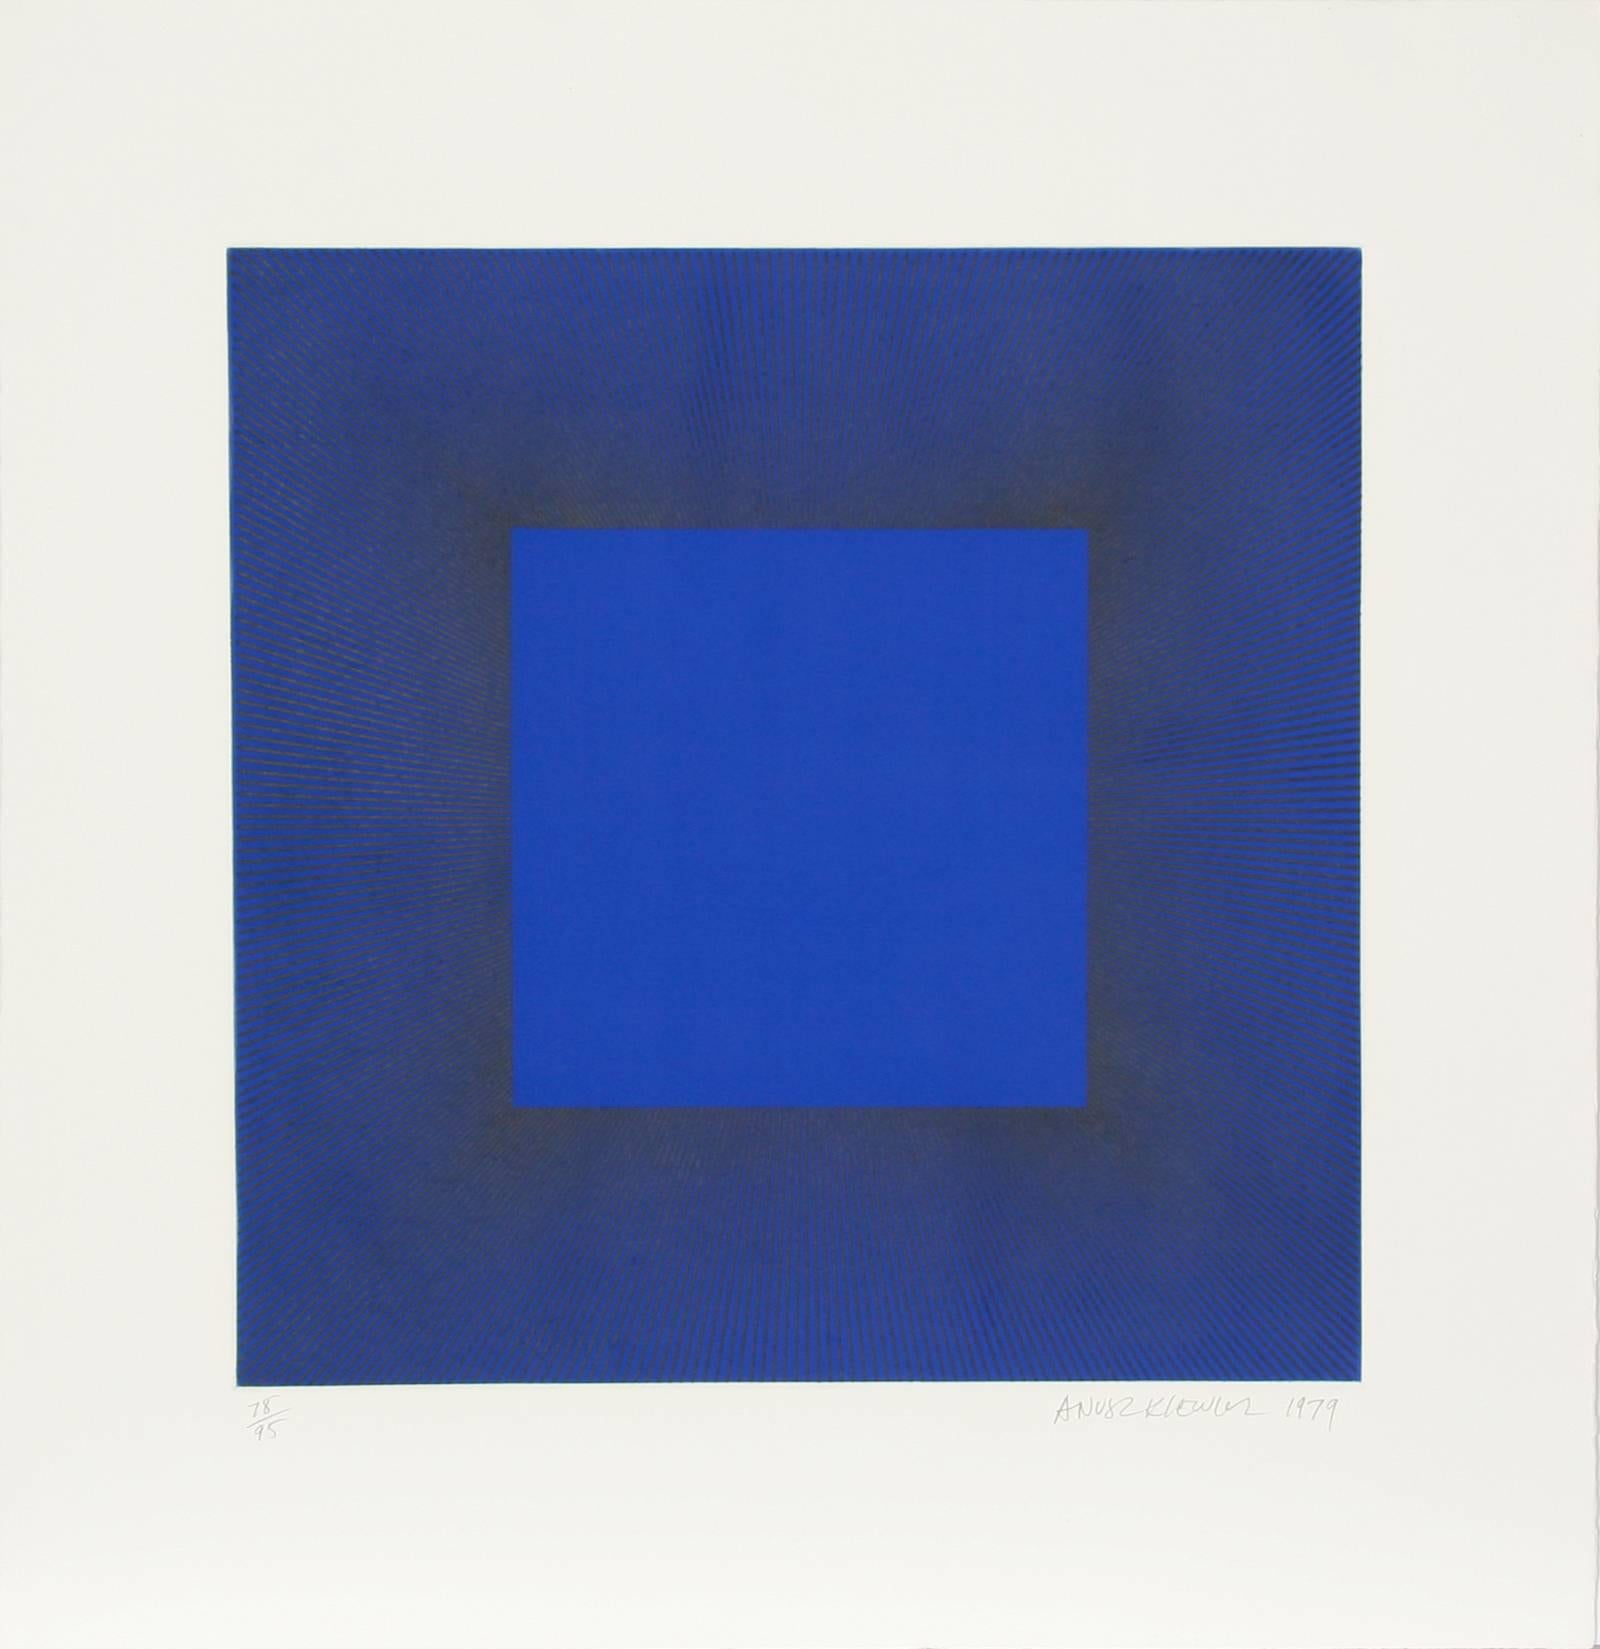 A student of Josef Albers, he shares Albers' fascination with shapes and their relationships to color. Considered a major force in the op art movement, Anuszkiewicz is concerned with the optical changes that occur when different high-intensity